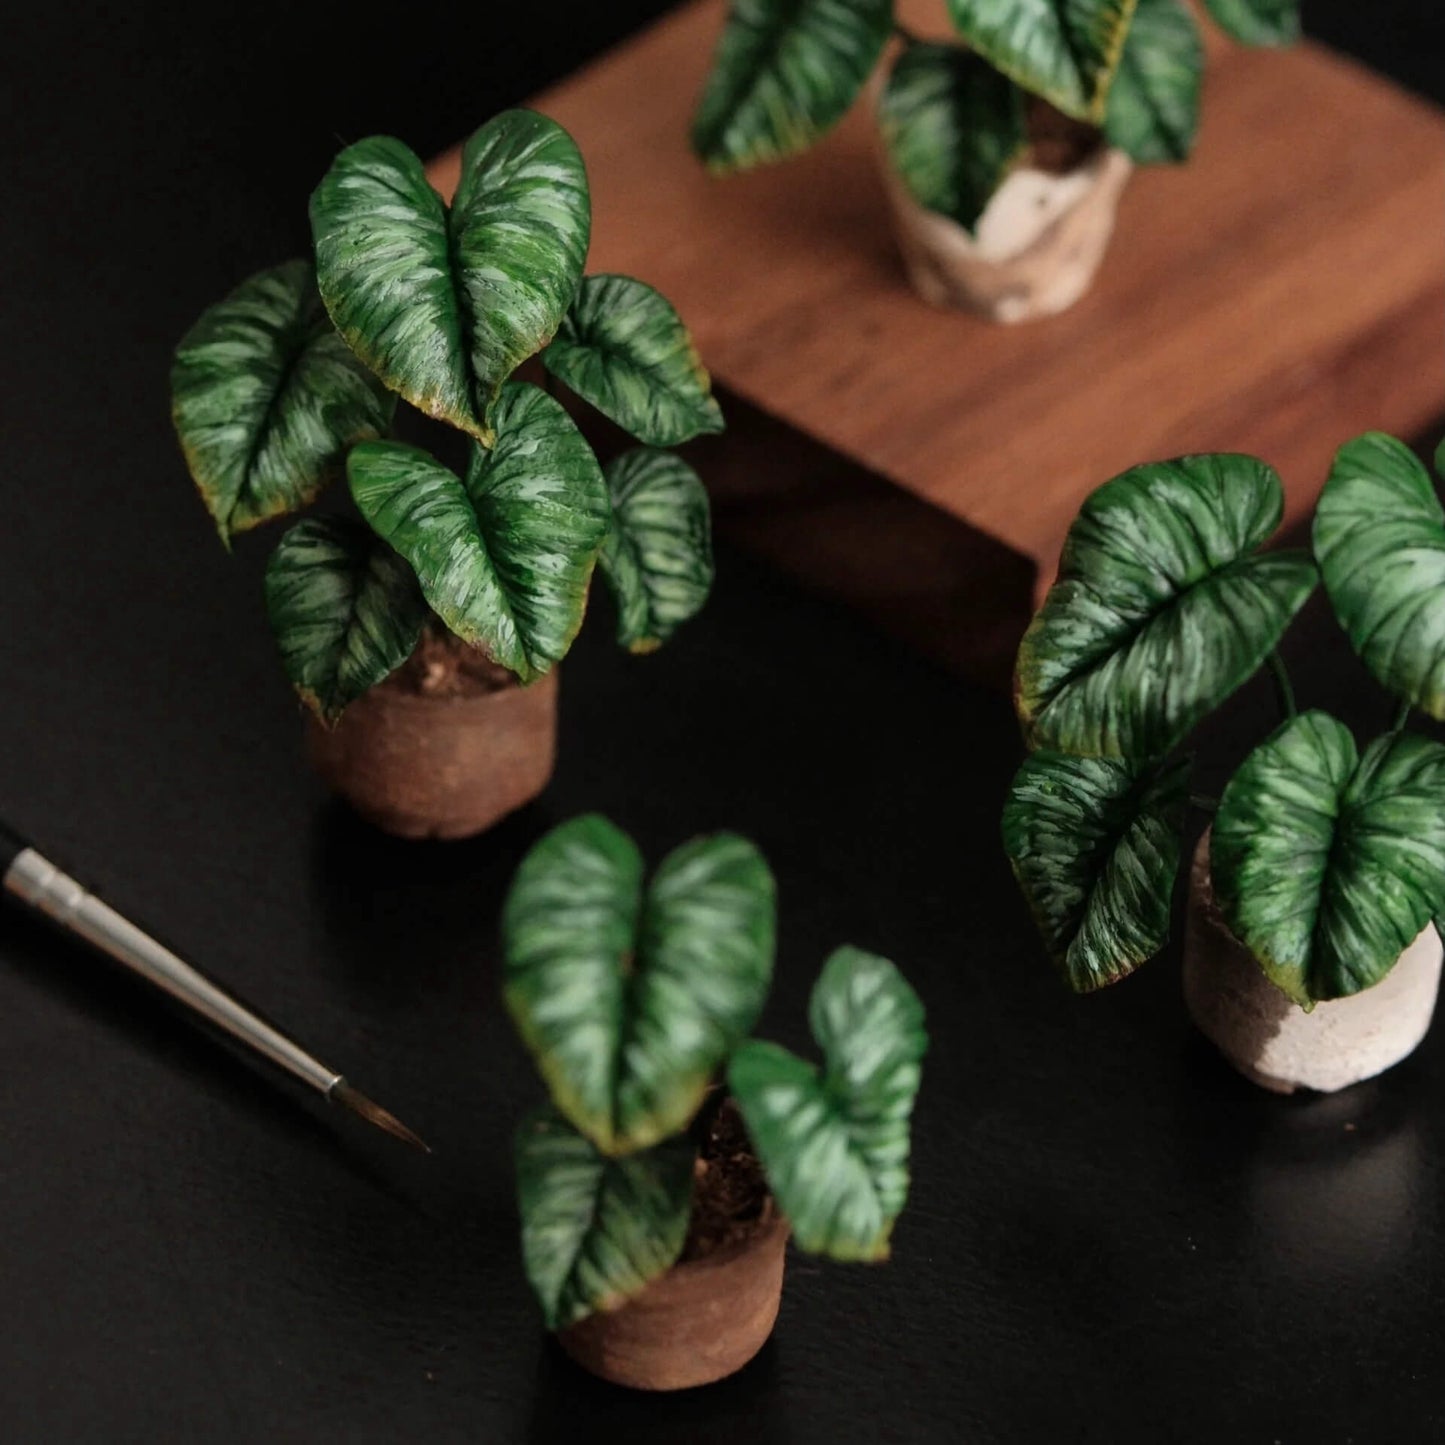 Philodendron Pastazanum Silver is a rare and beautiful terrestrial Aroid which features bi-color heart shaped leaves with green cylindrical petioles. Scale: 1:6; 1:12  Material: Handmade from Clay  Size: 5-8 Leaves